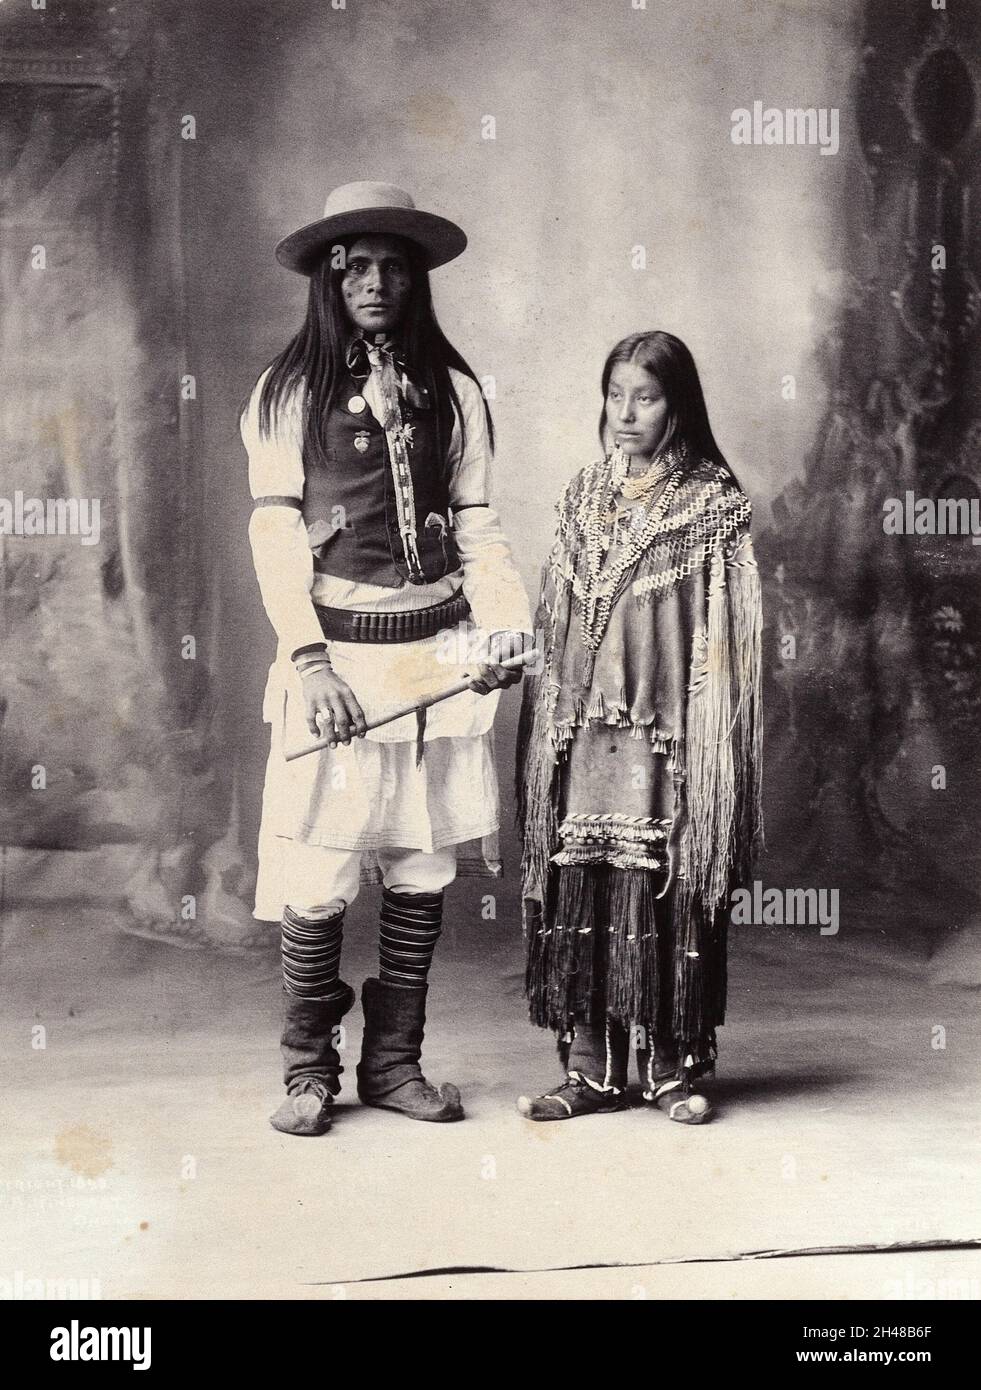 A native American man and woman. Platinum print by F.A. Rinehart, 1898. Stock Photo